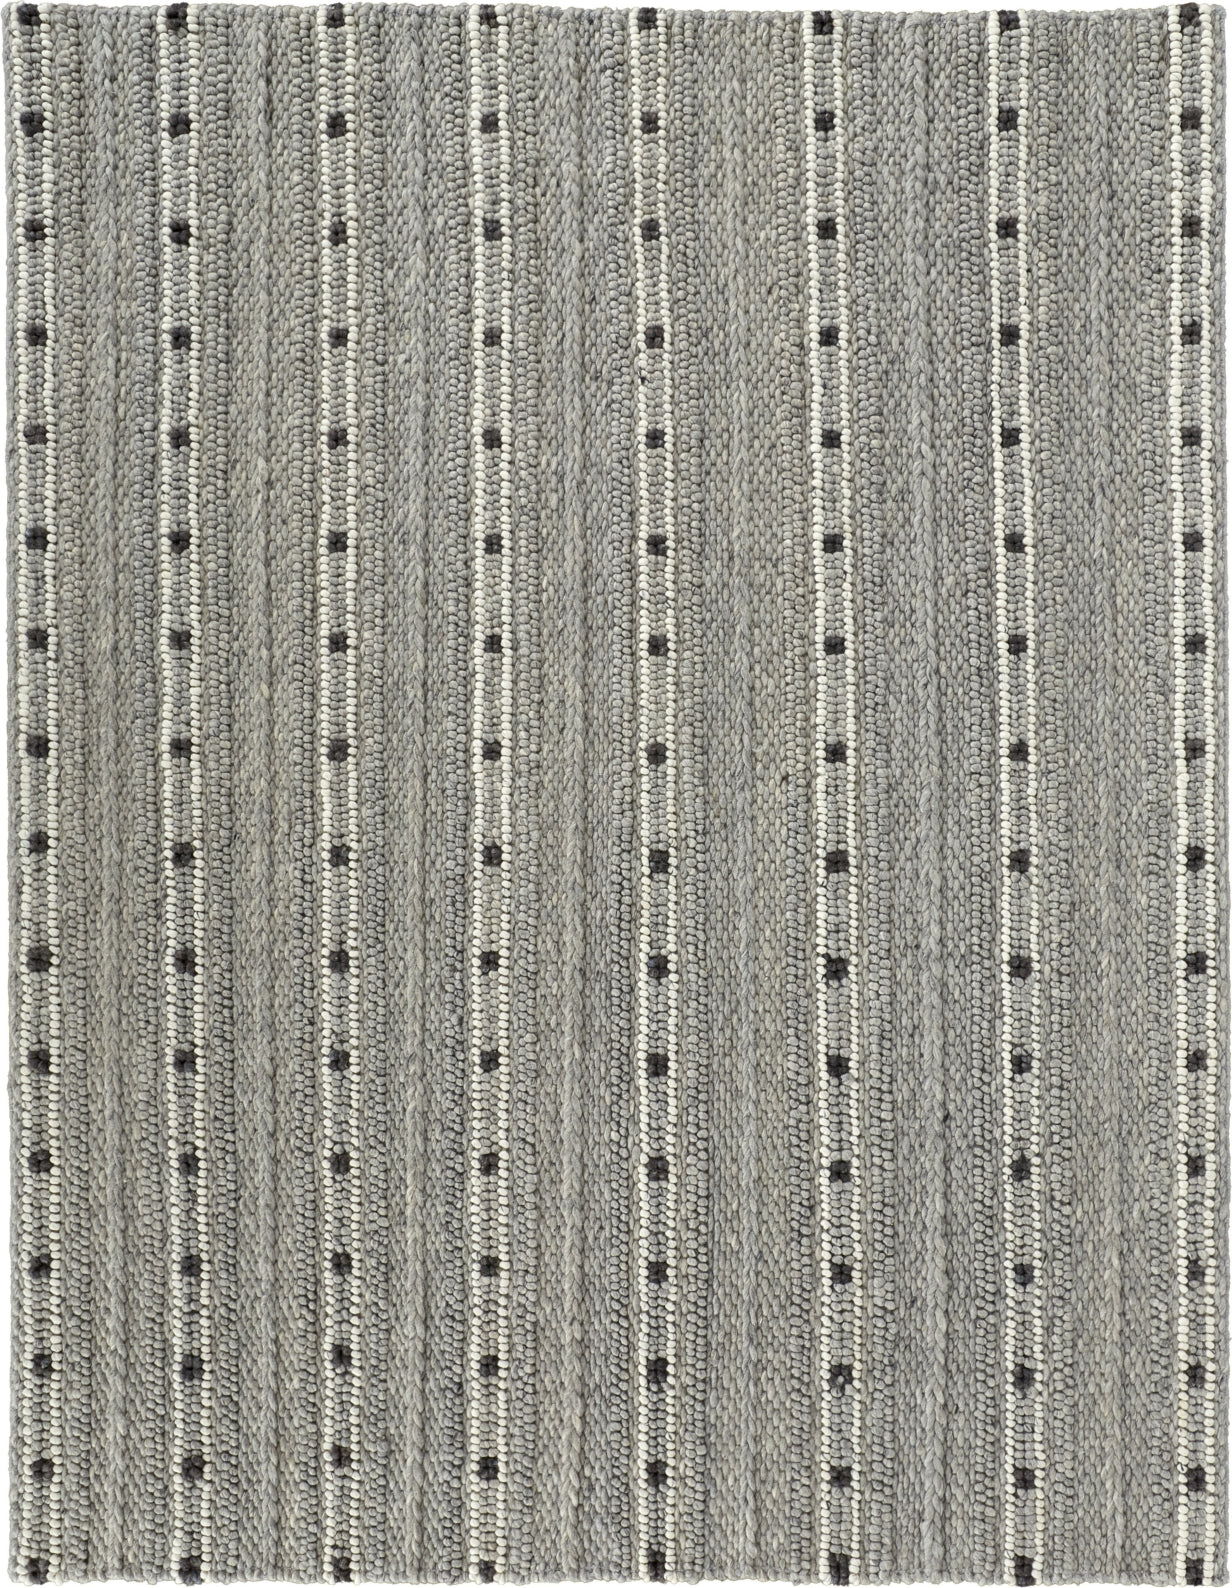 Feizy Cicero T8006 Gray/Black/White Area Rug by Thom Filicia